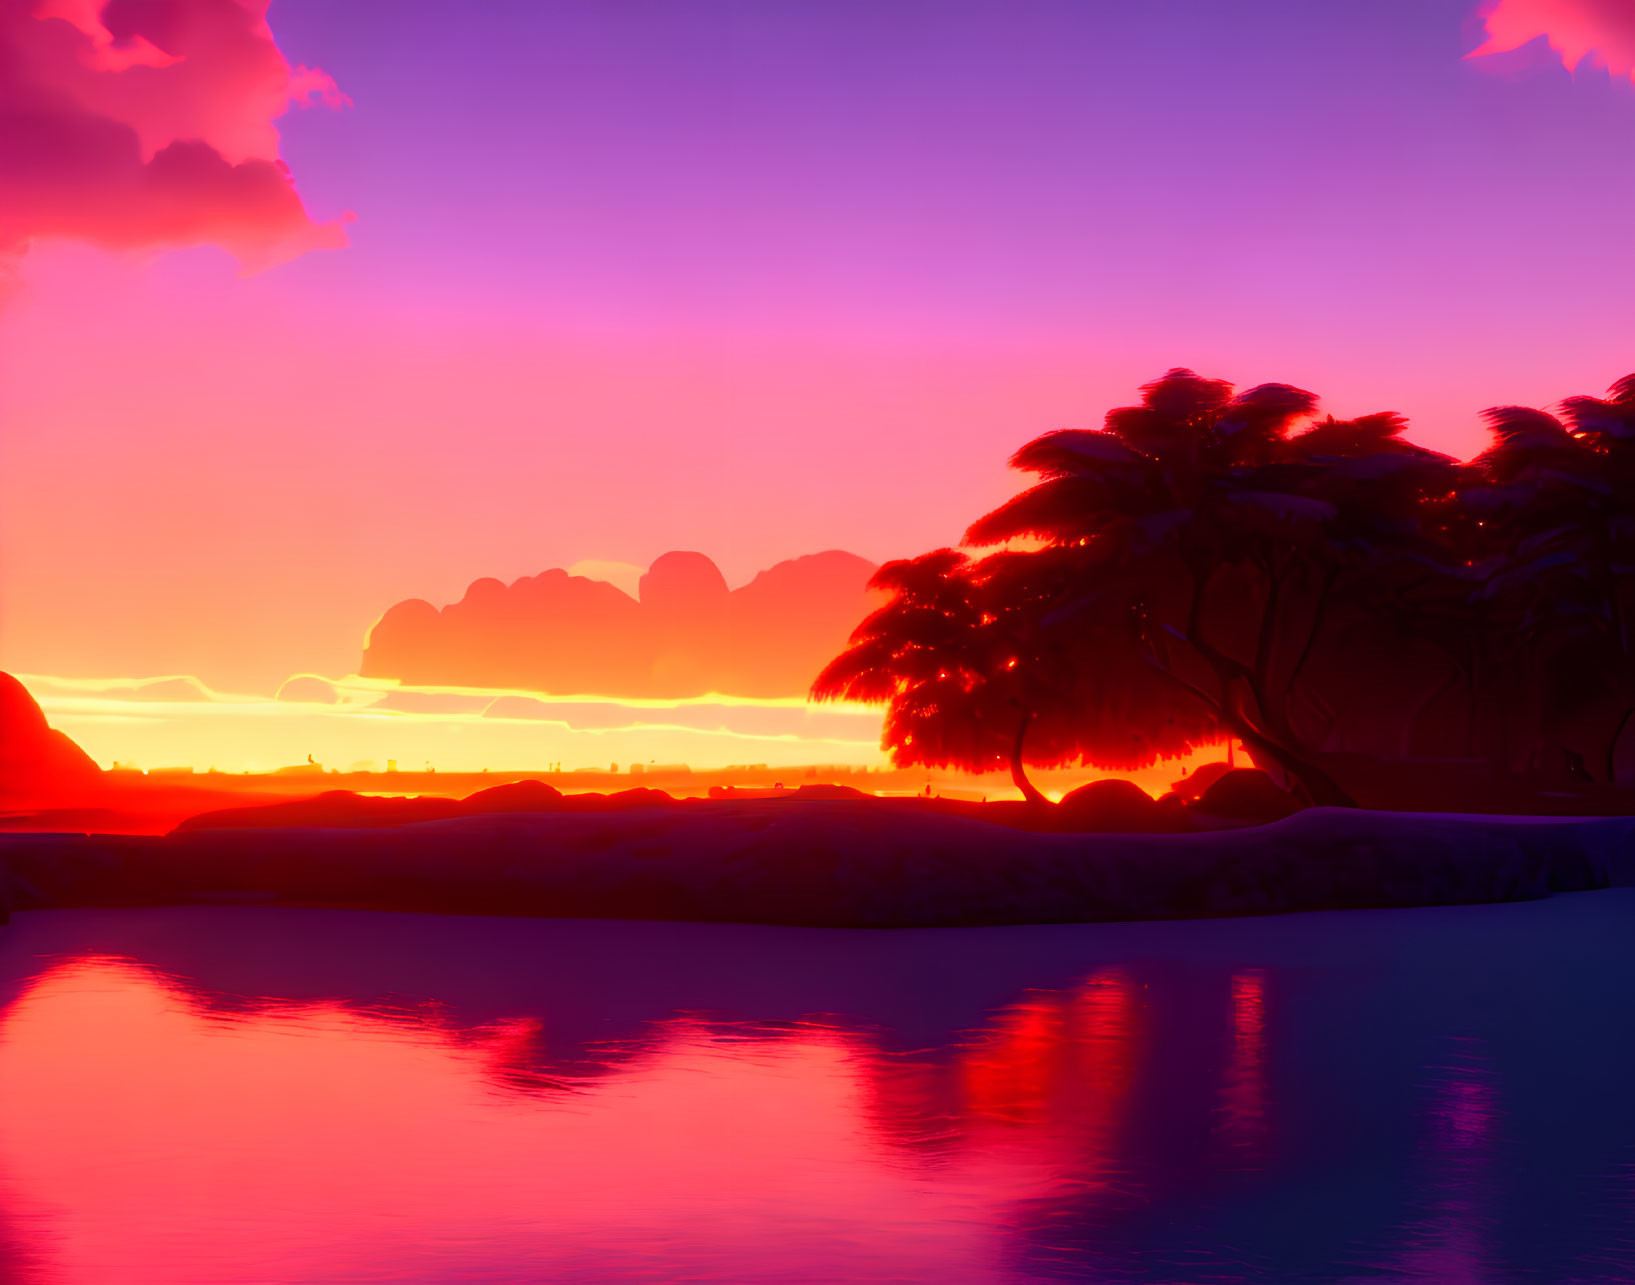 Tropical landscape: Vibrant sunset with pink and purple hues